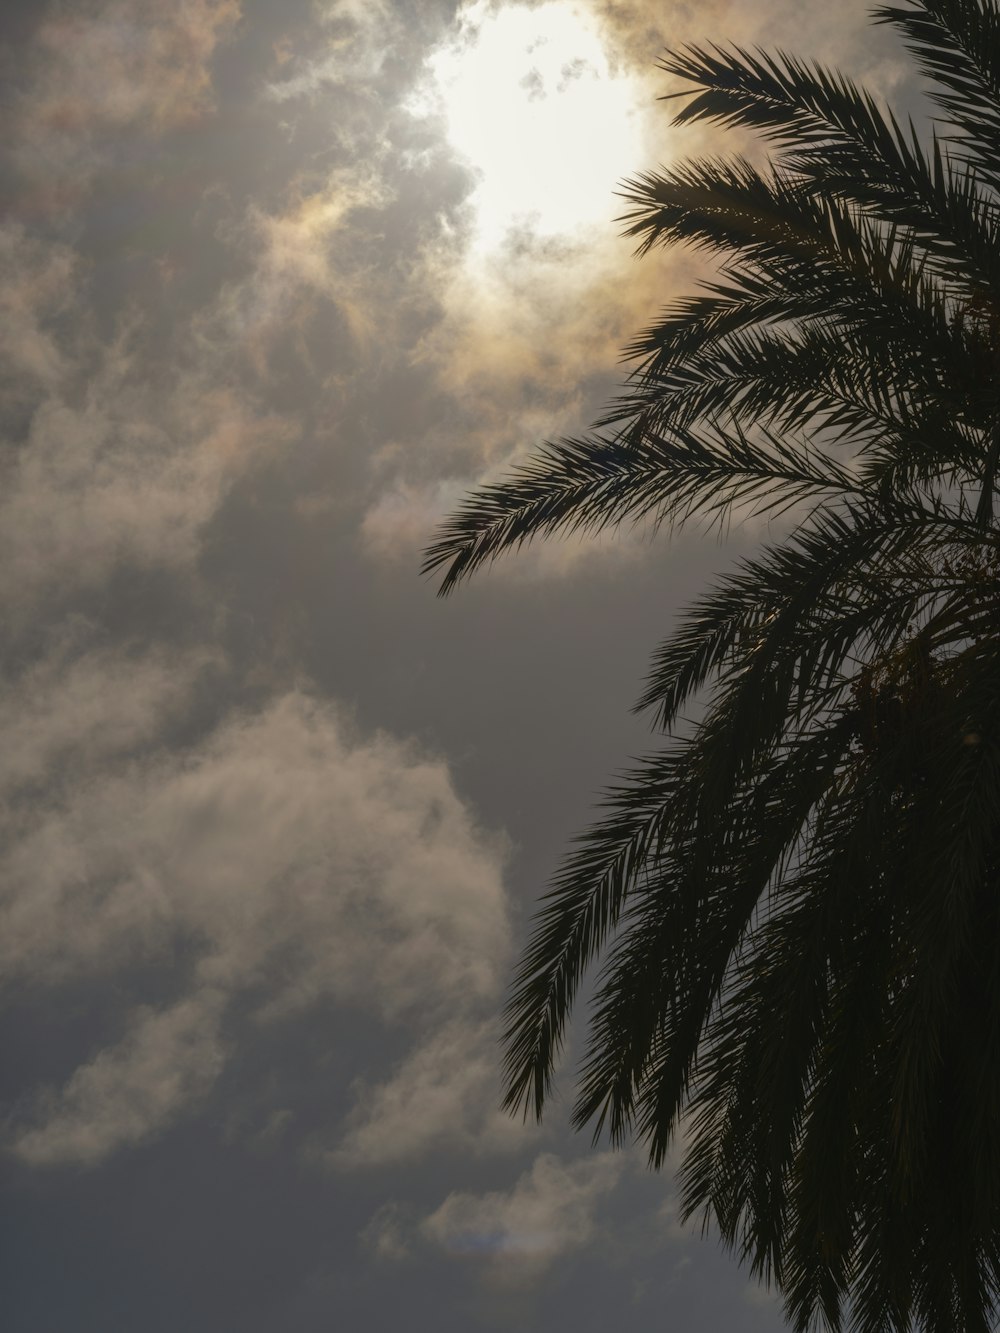 the sun is shining through the clouds behind a palm tree